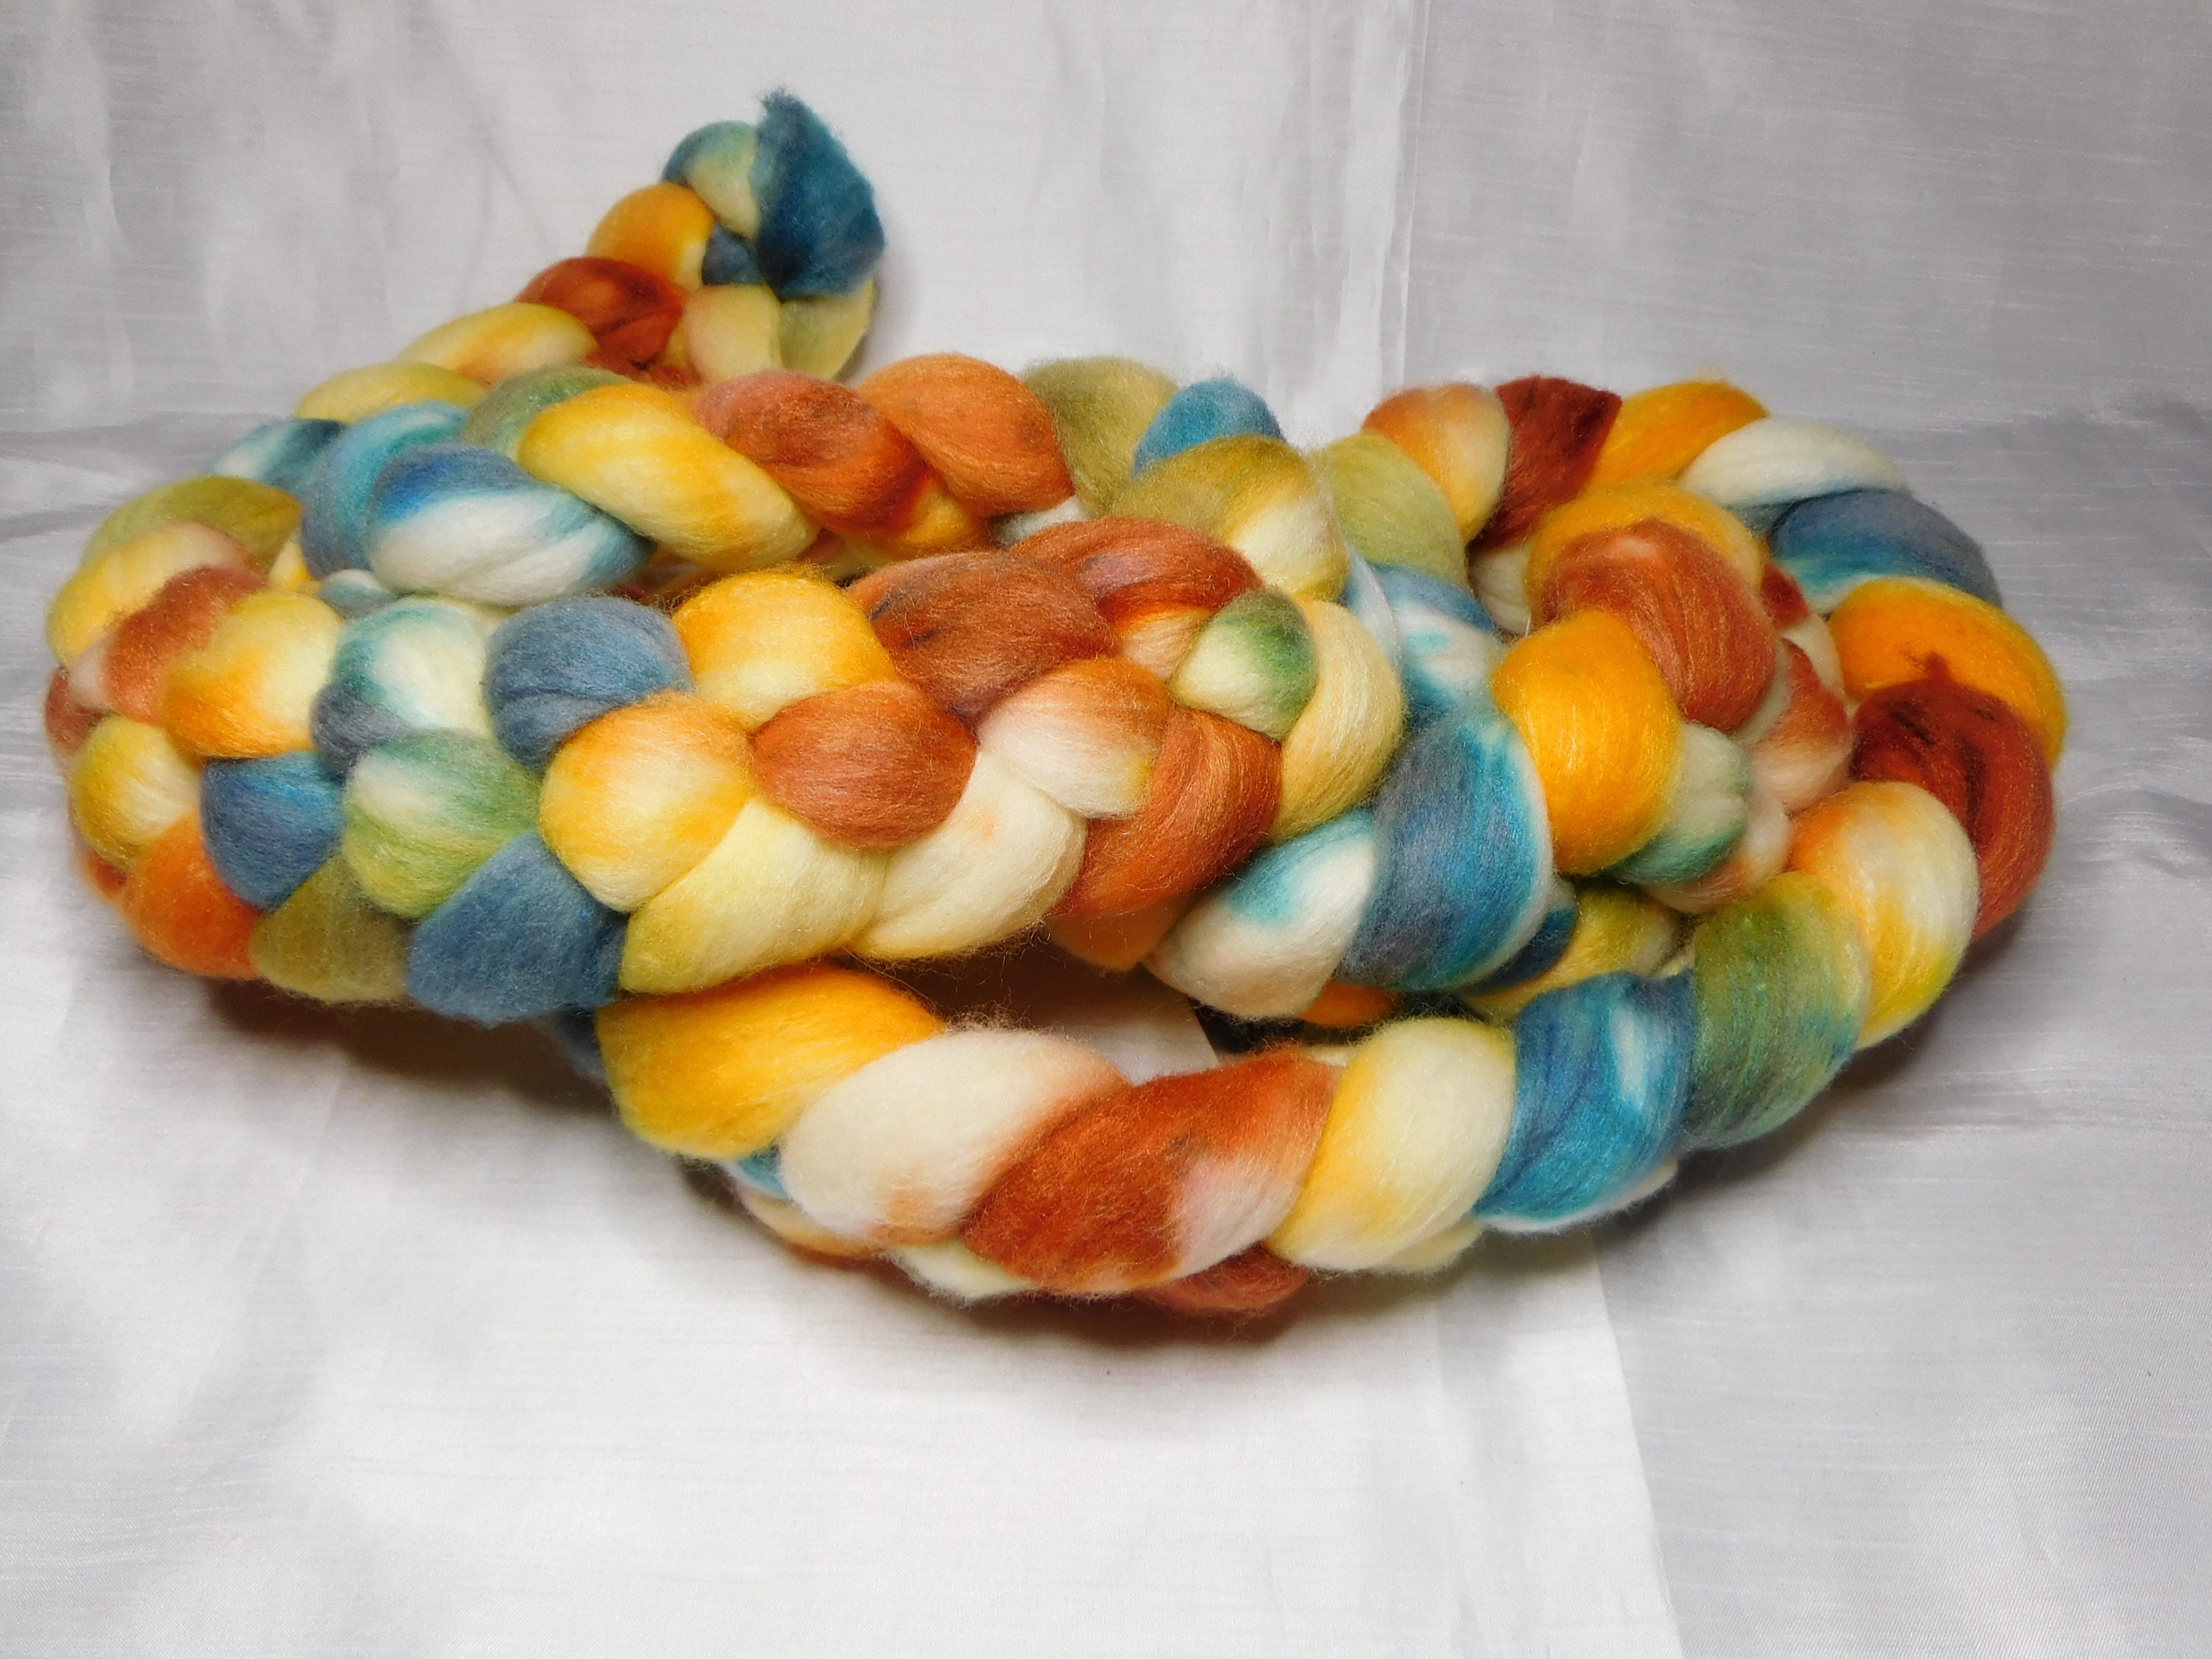 Merino and Silk 4 ounces Hand Dyed Combed Top Felting for Spinning Roving